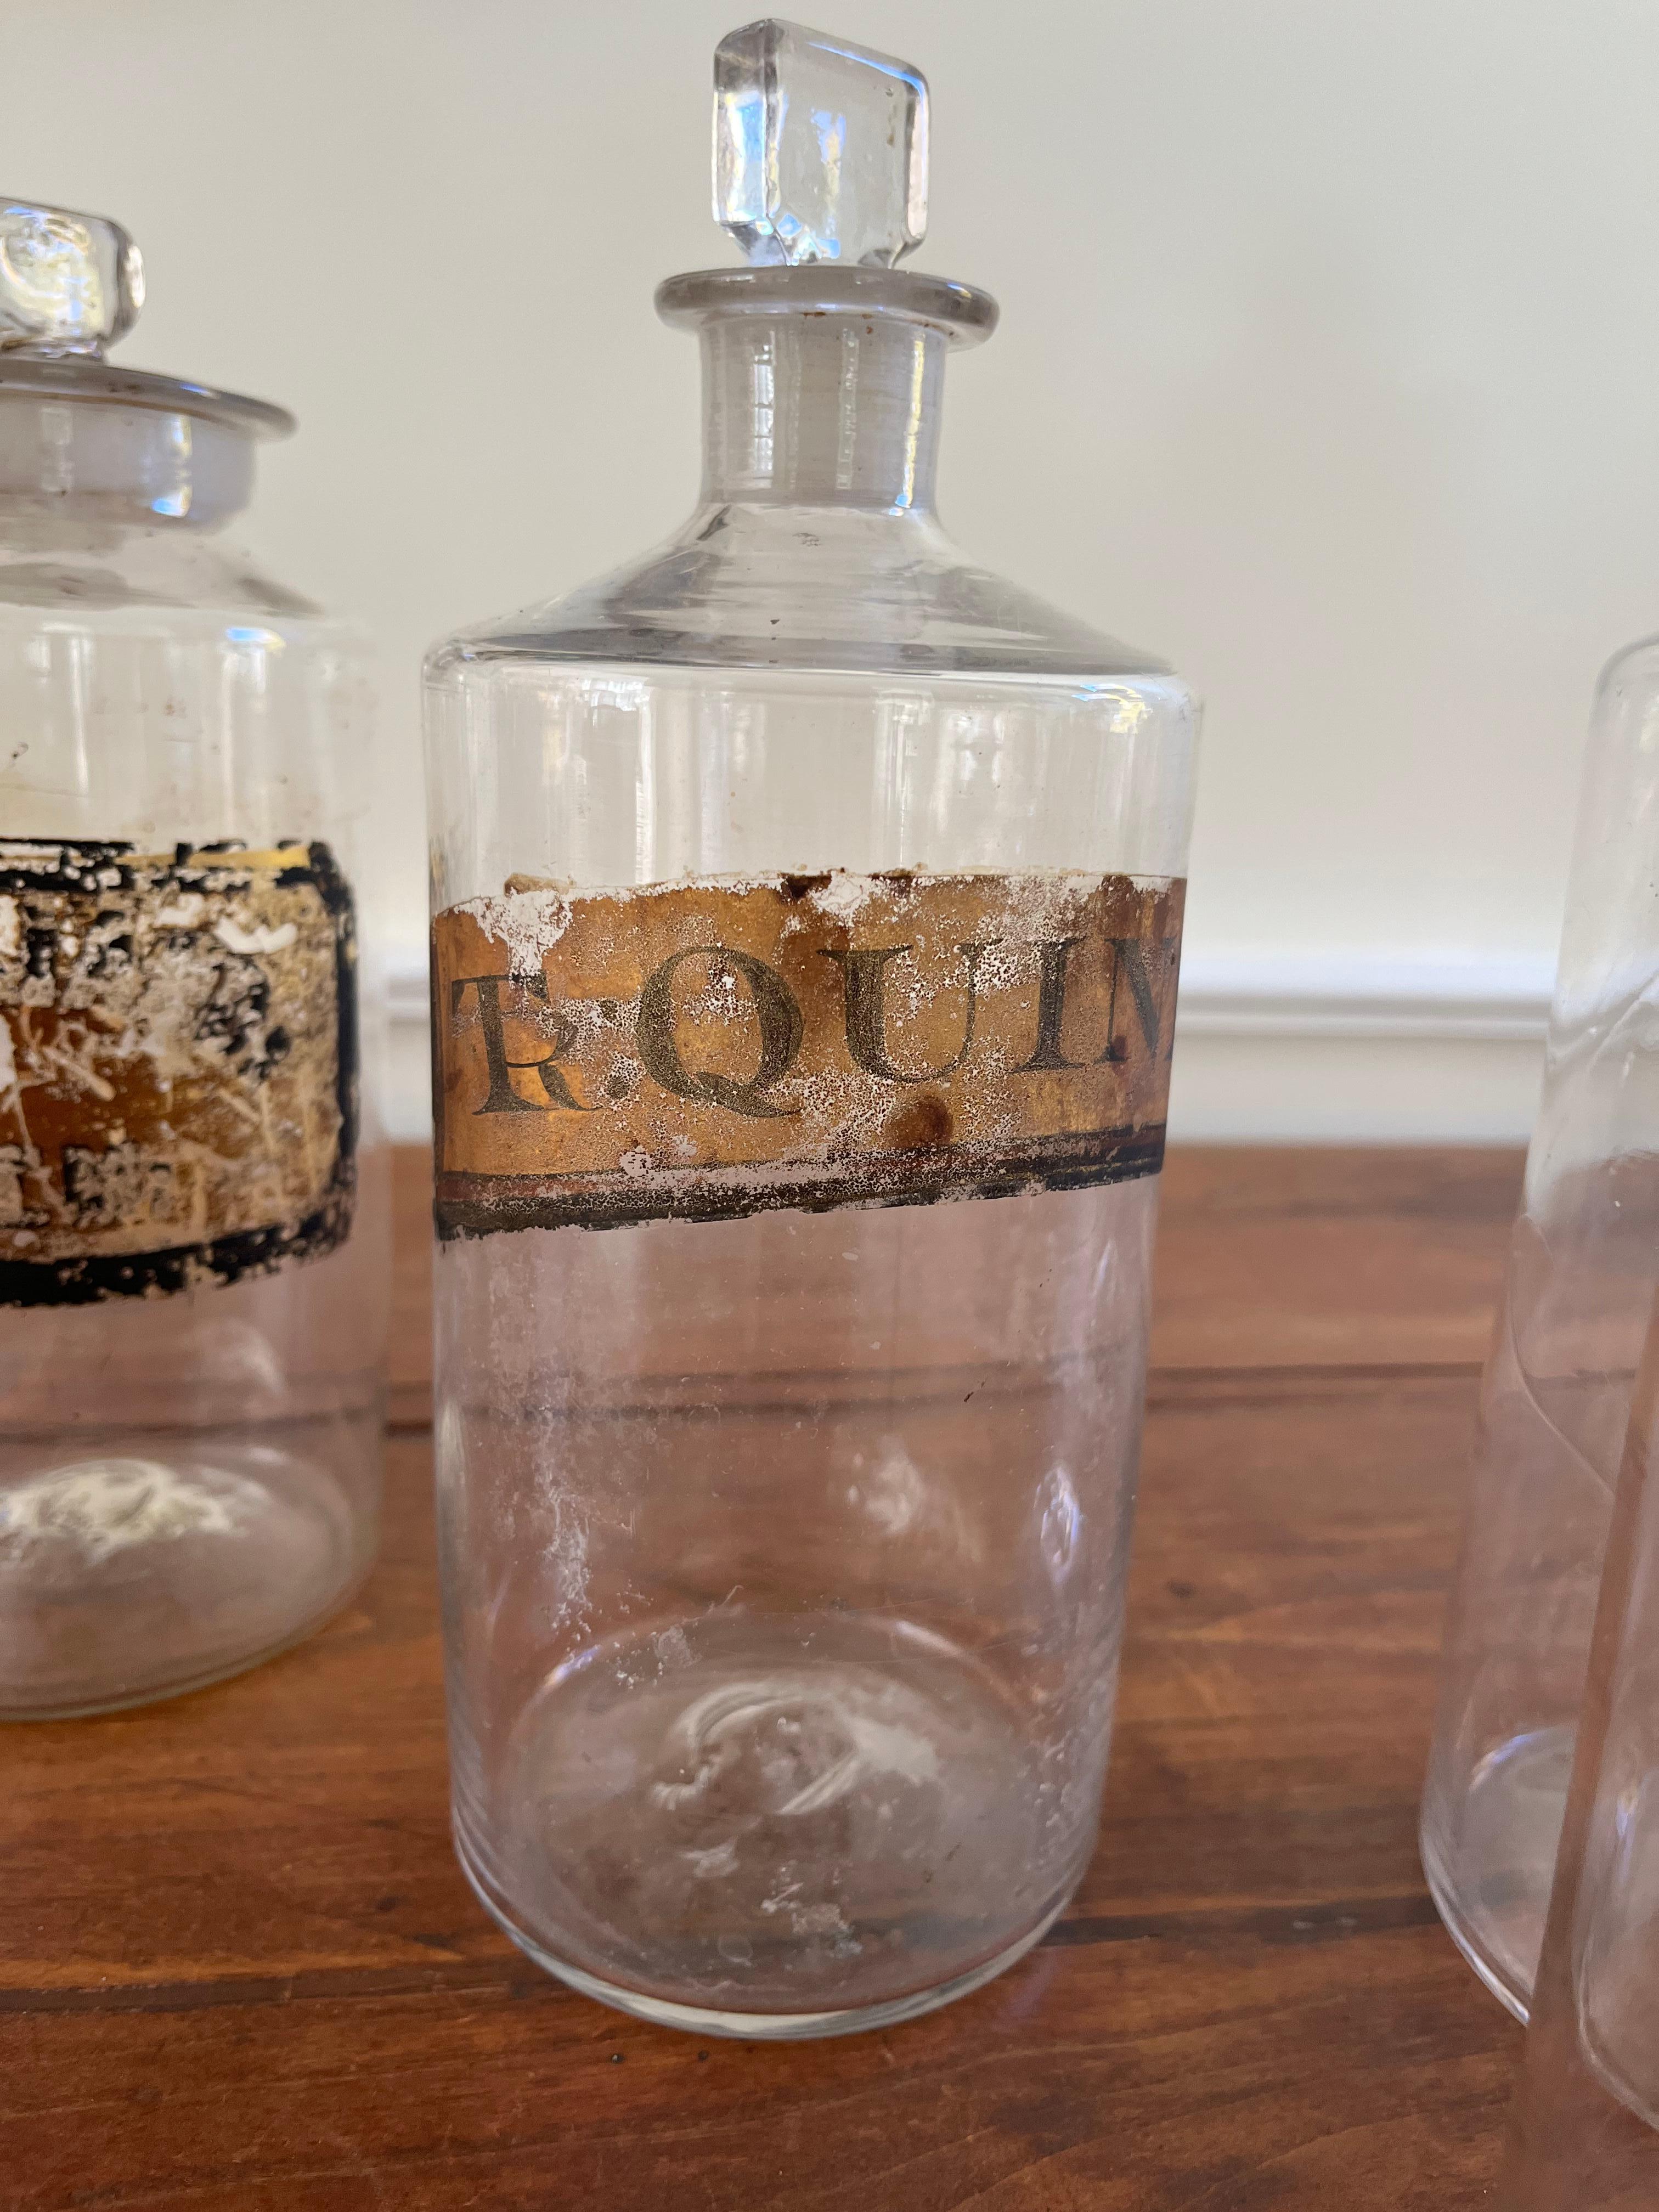 A nice collection of apothecary bottles, some with labels and traces of gilt decoration, circa 1850, hand-blown with polished pontil marks on base, and retaining their original glass stoppers.